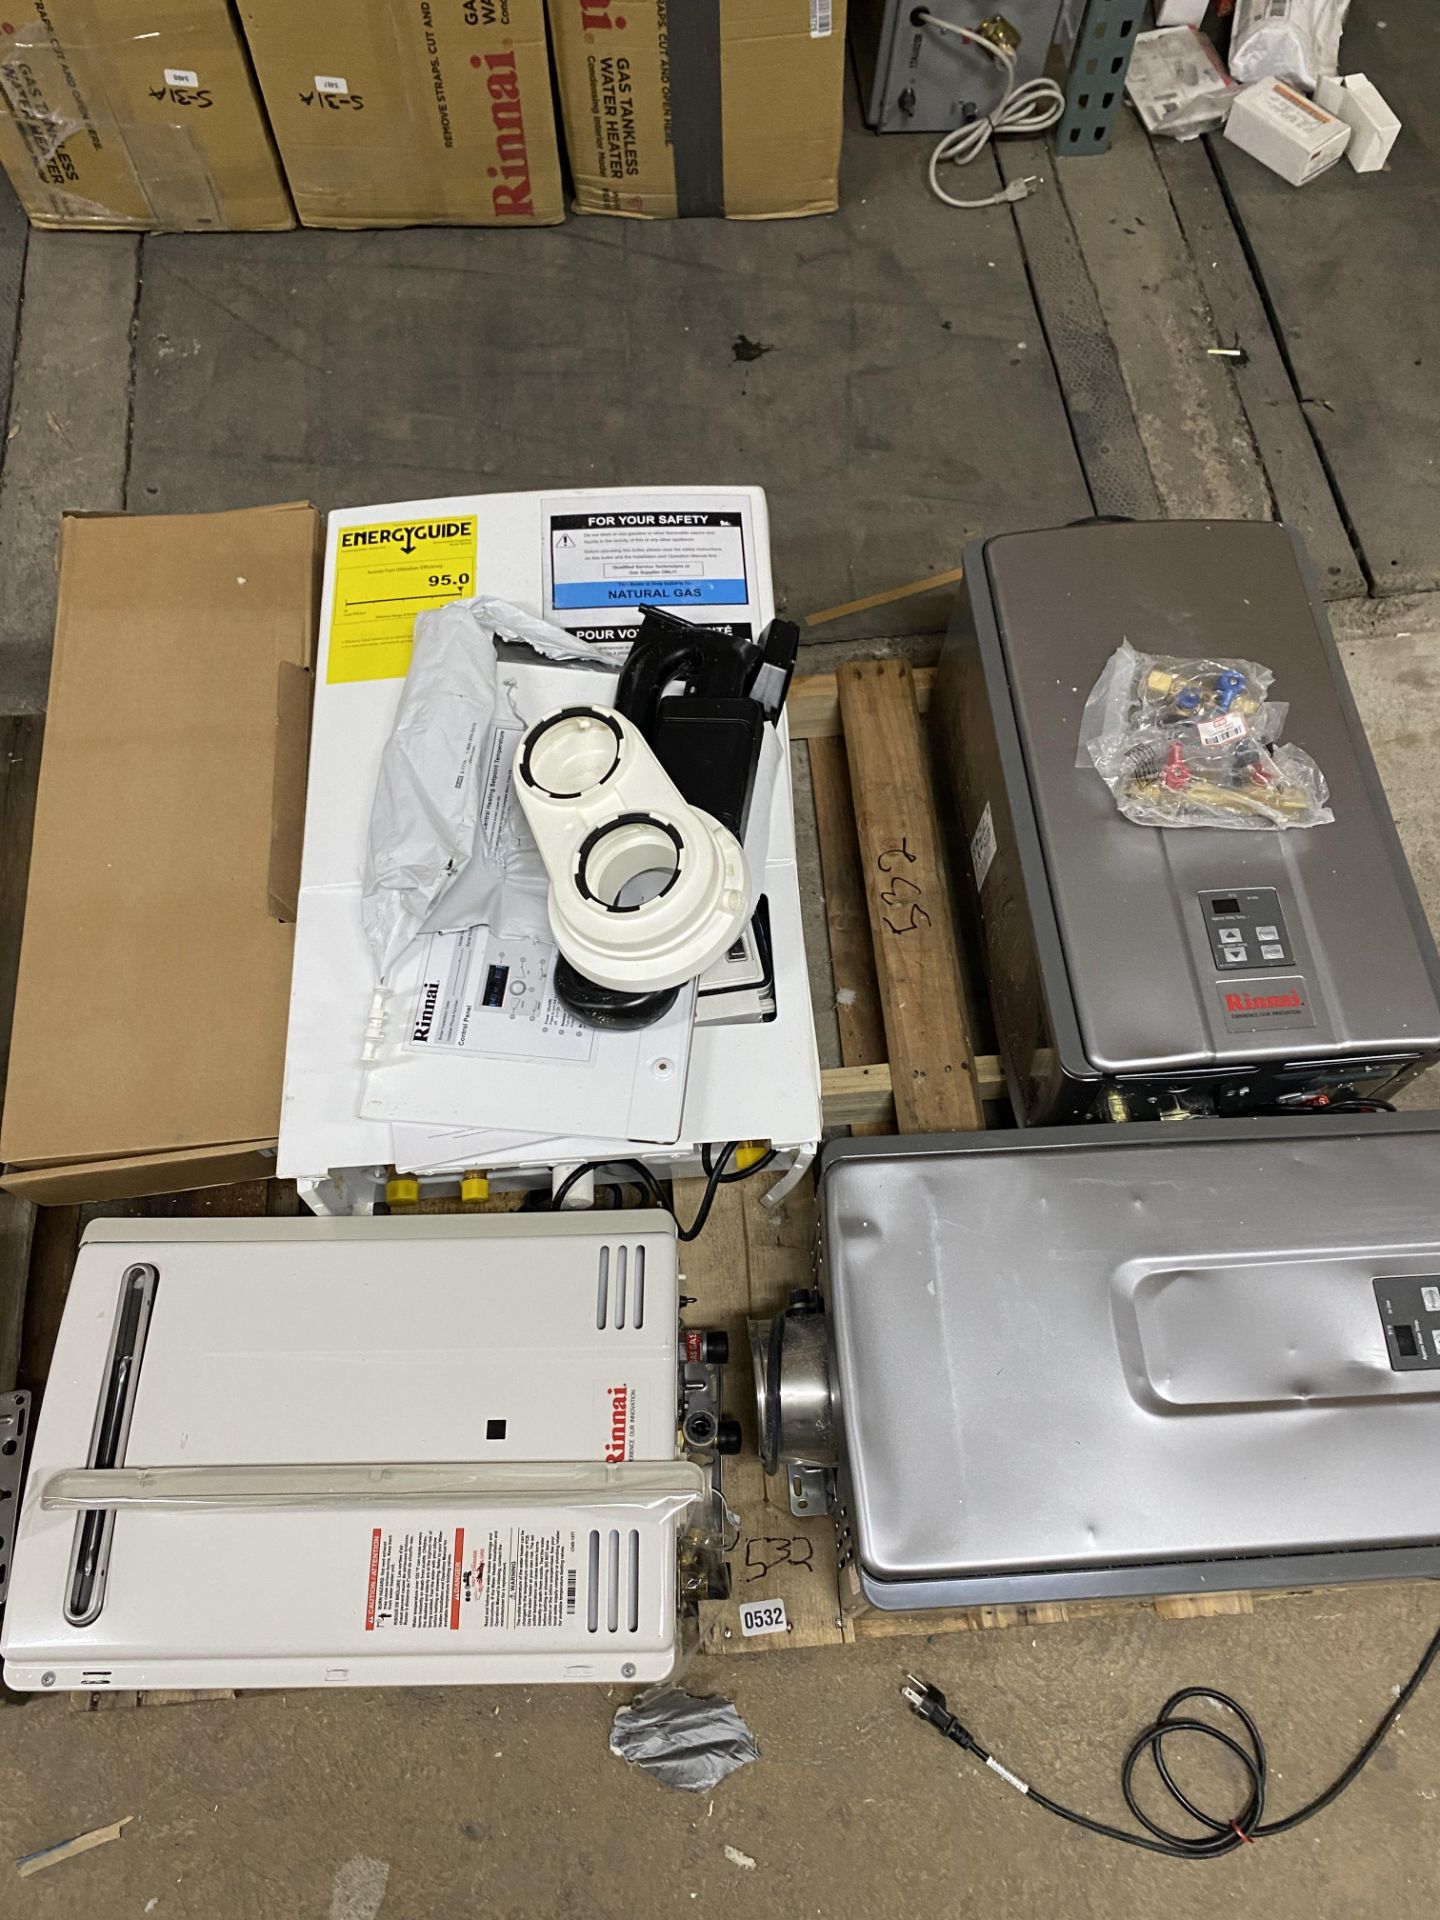 Skid Lot of Misc Rinnai Tankless Water Heaters